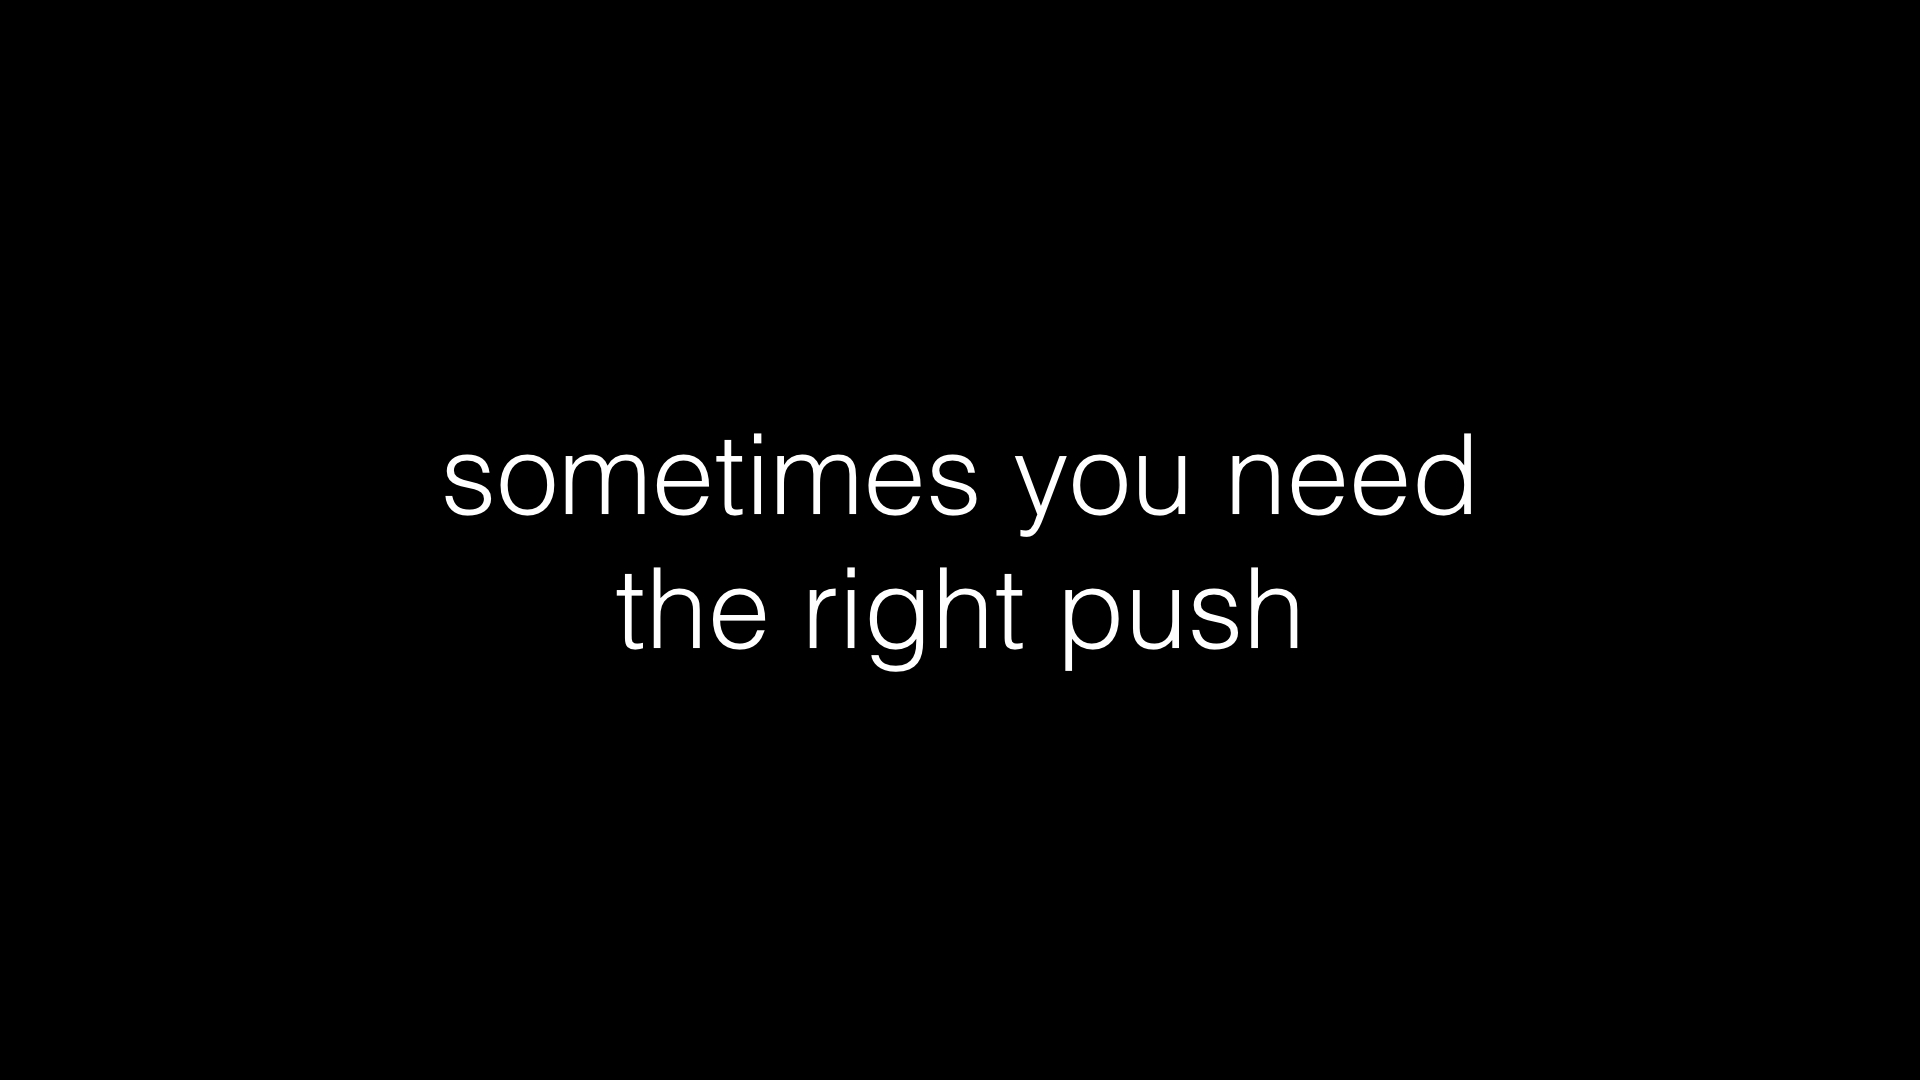 Sometimes you need the right push